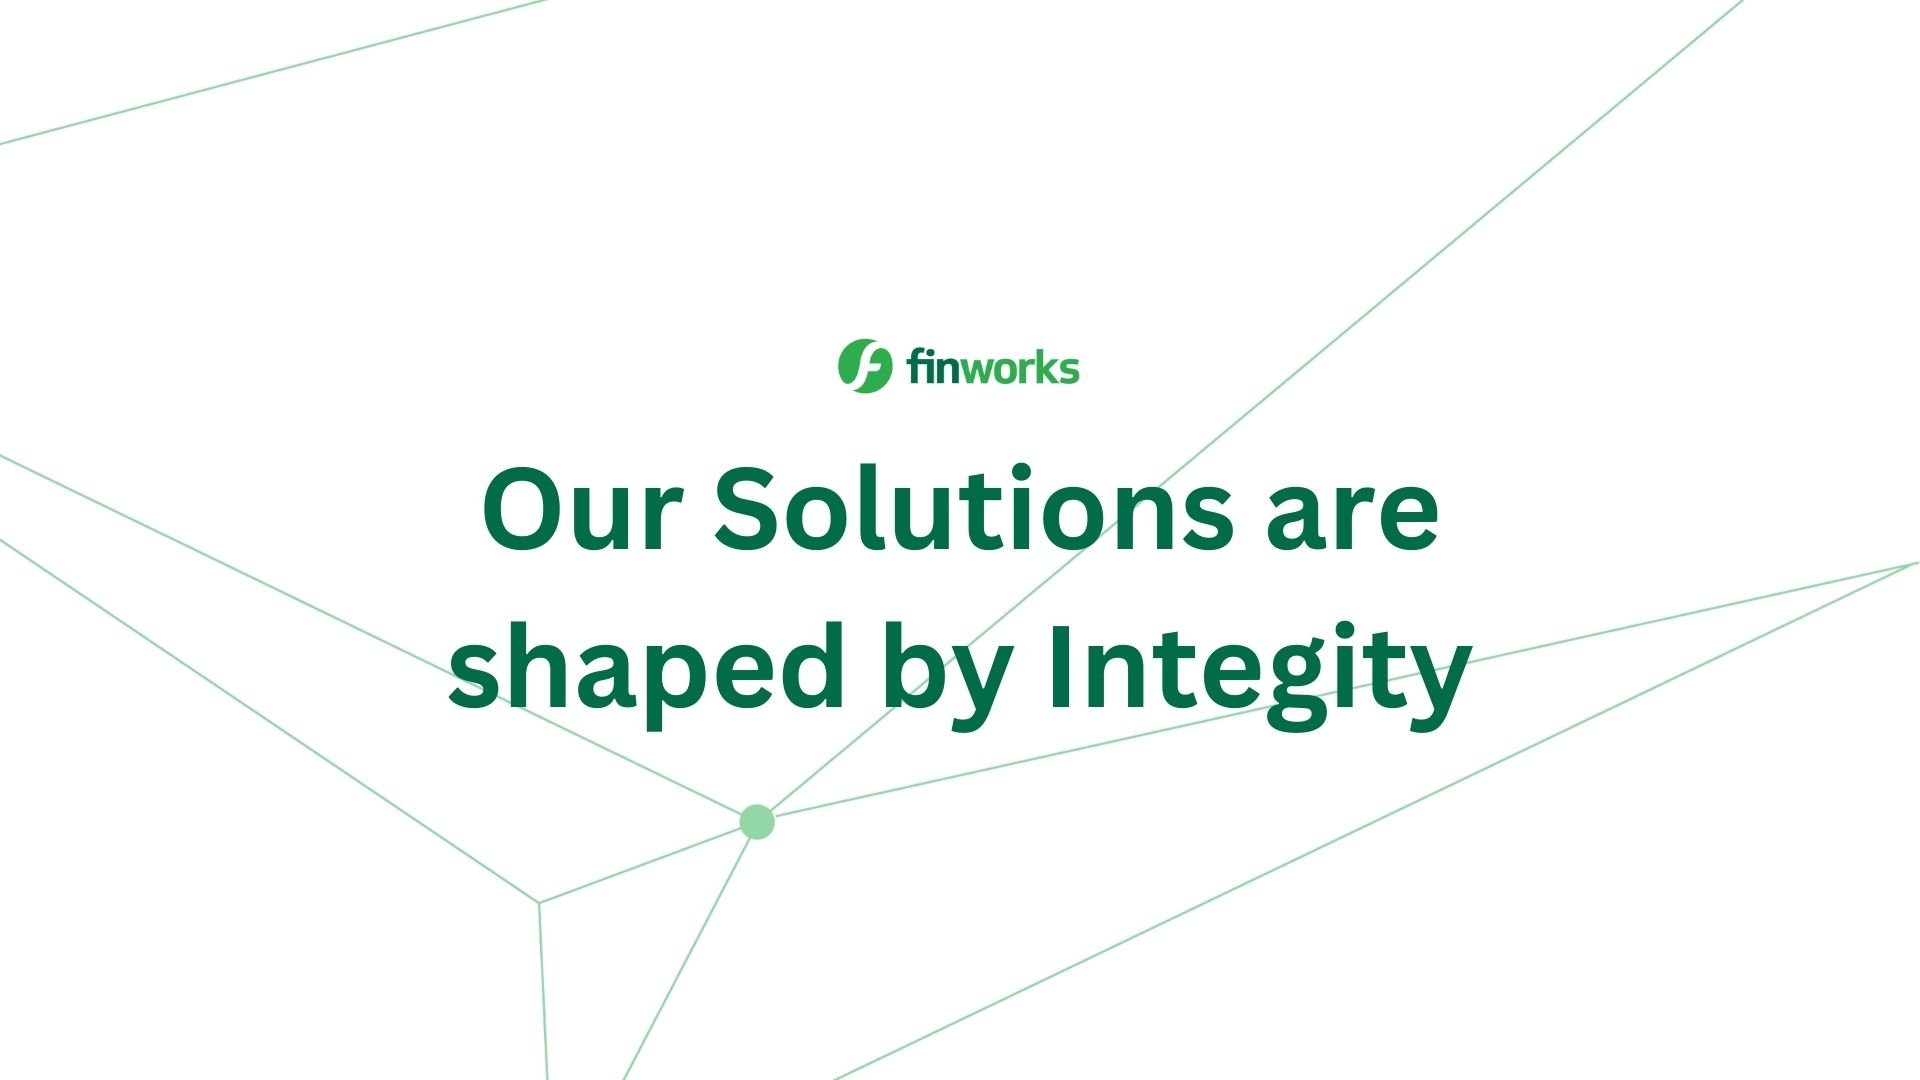 Finworks' trusted business relationships are built on integrity